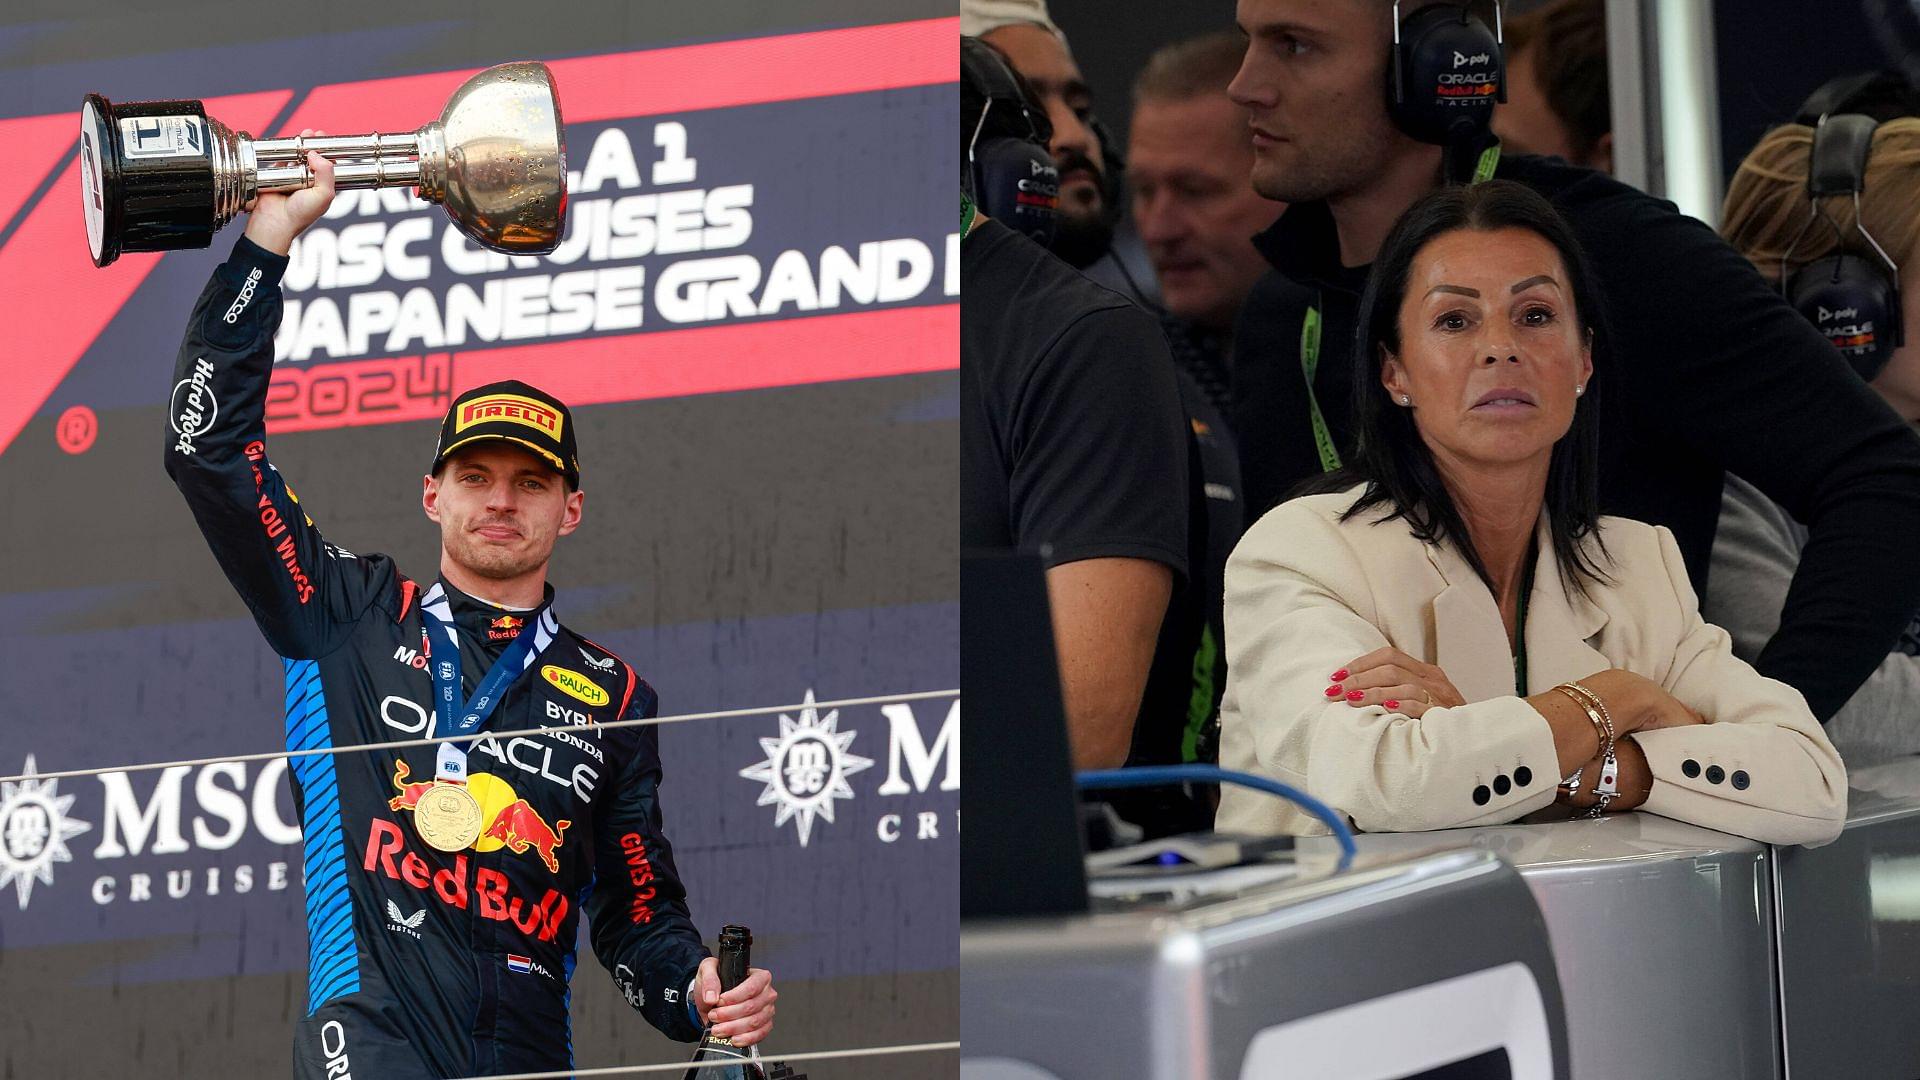 “Not All About His Dad”: Max Verstappen’s Mother Sophie Kumpen Hailed for Making a Champion Out of Him